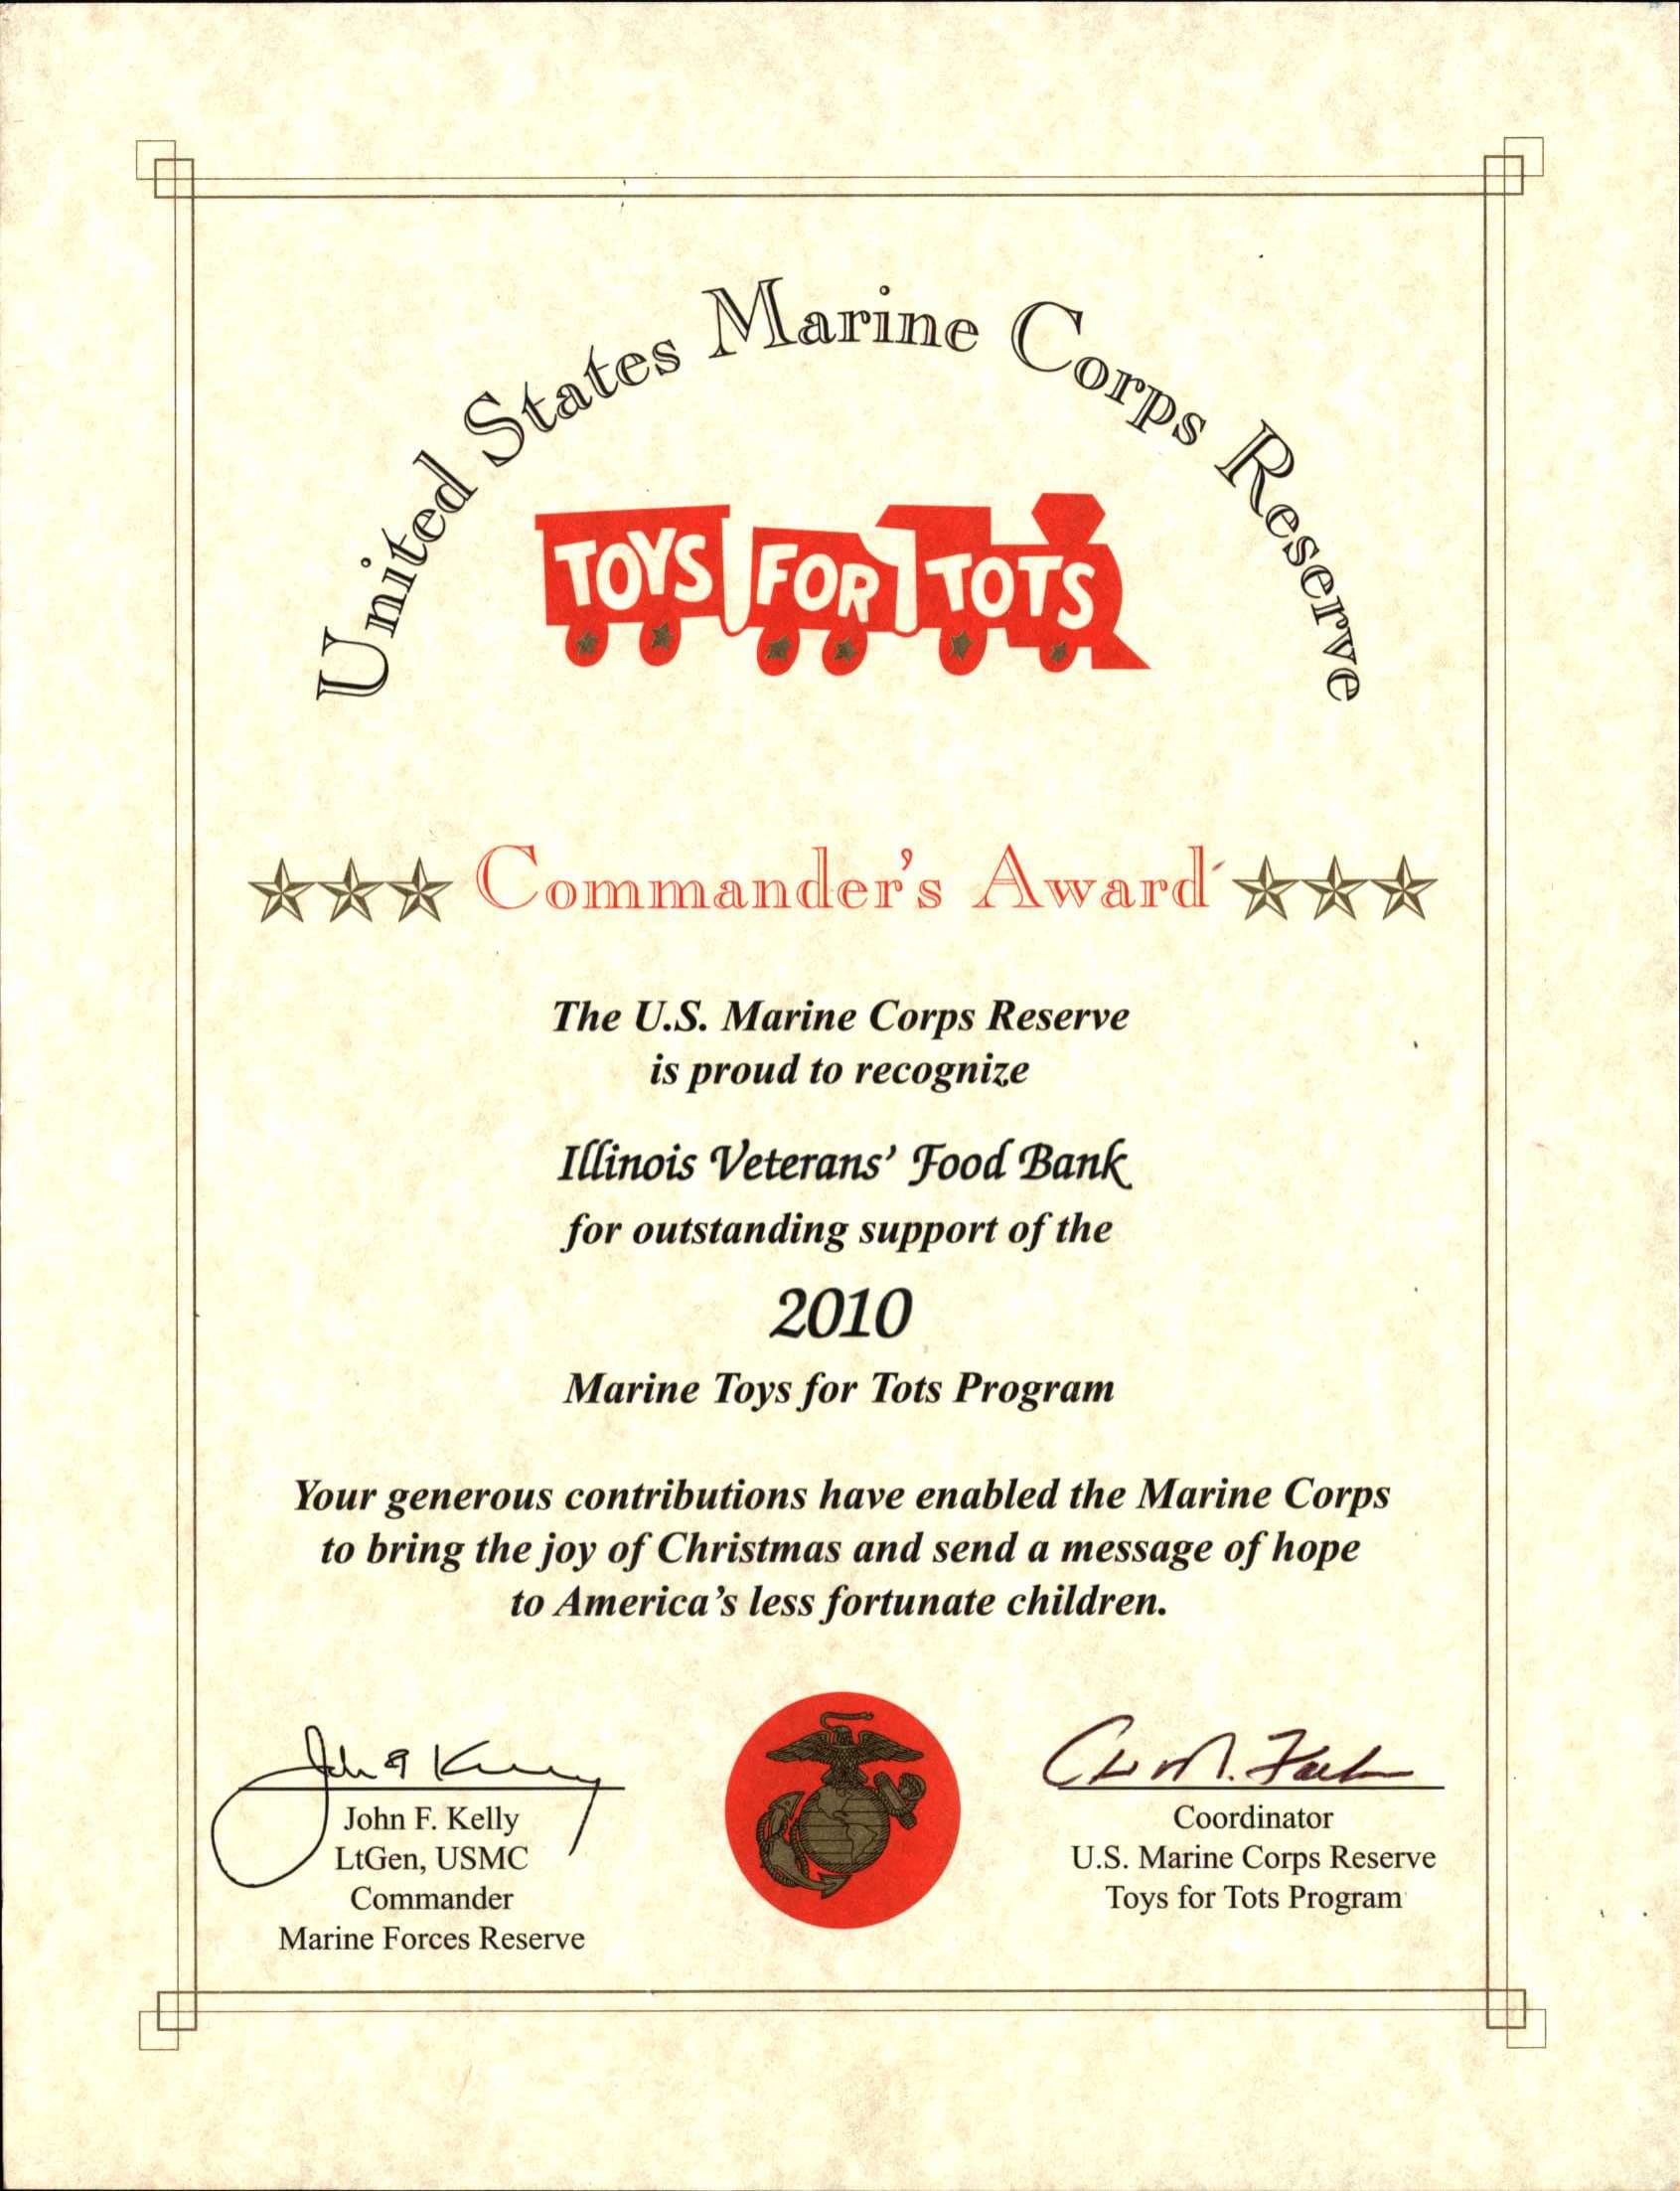 Certificate of Recognition from Toys for Tots